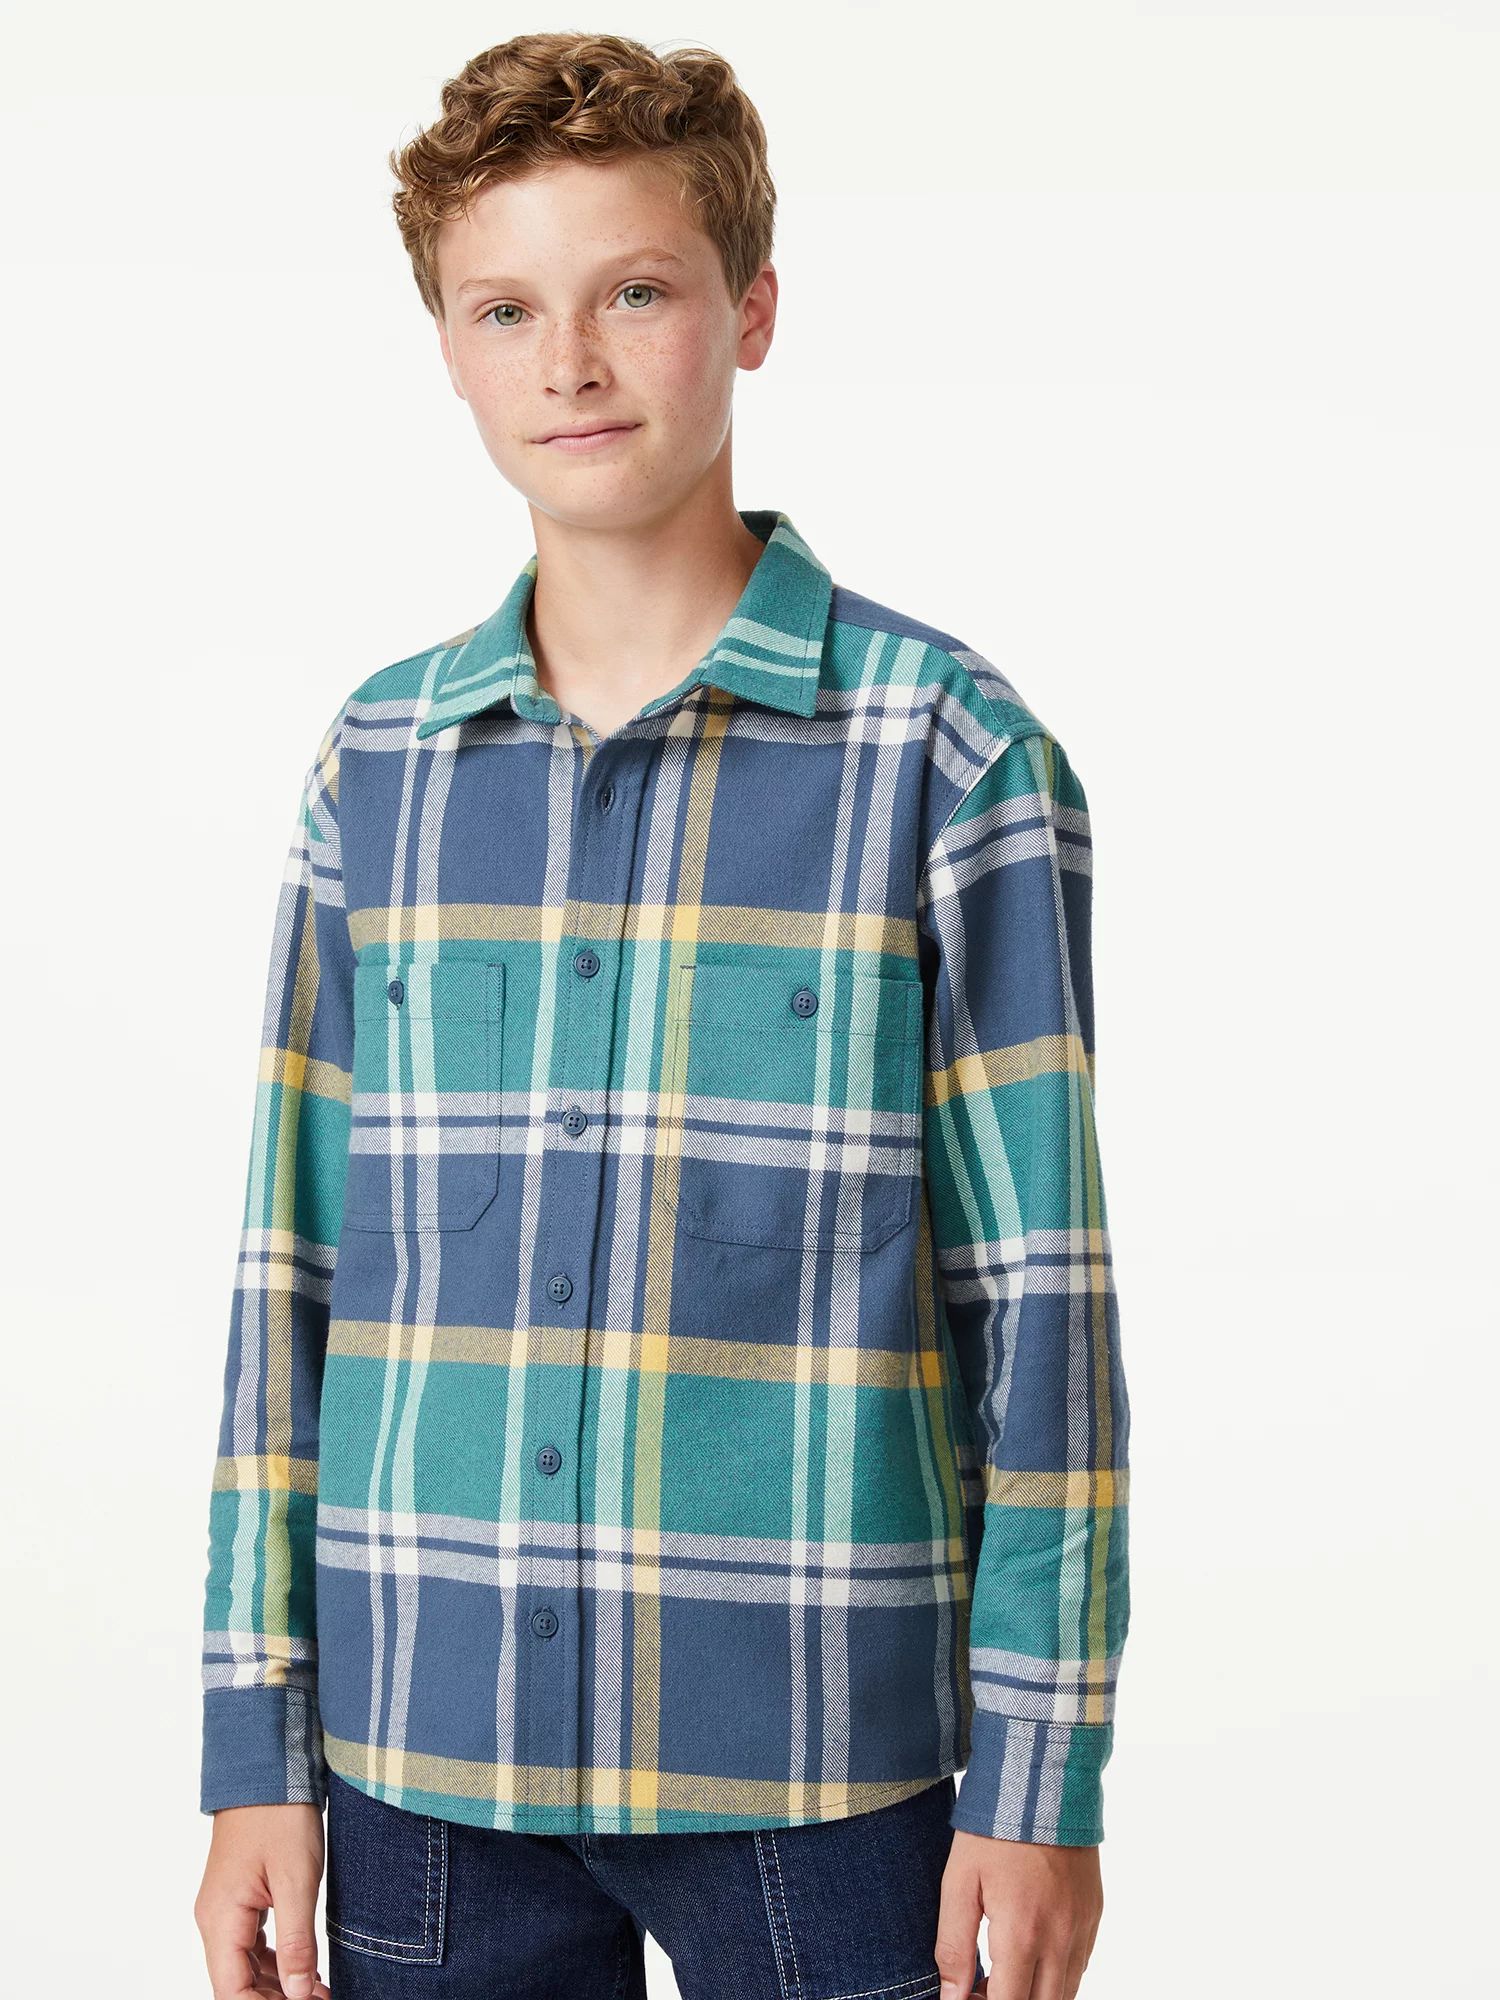 Free Assembly Boys Long Sleeve Flannel Shirt, Sizes 4-18 | Walmart (US)